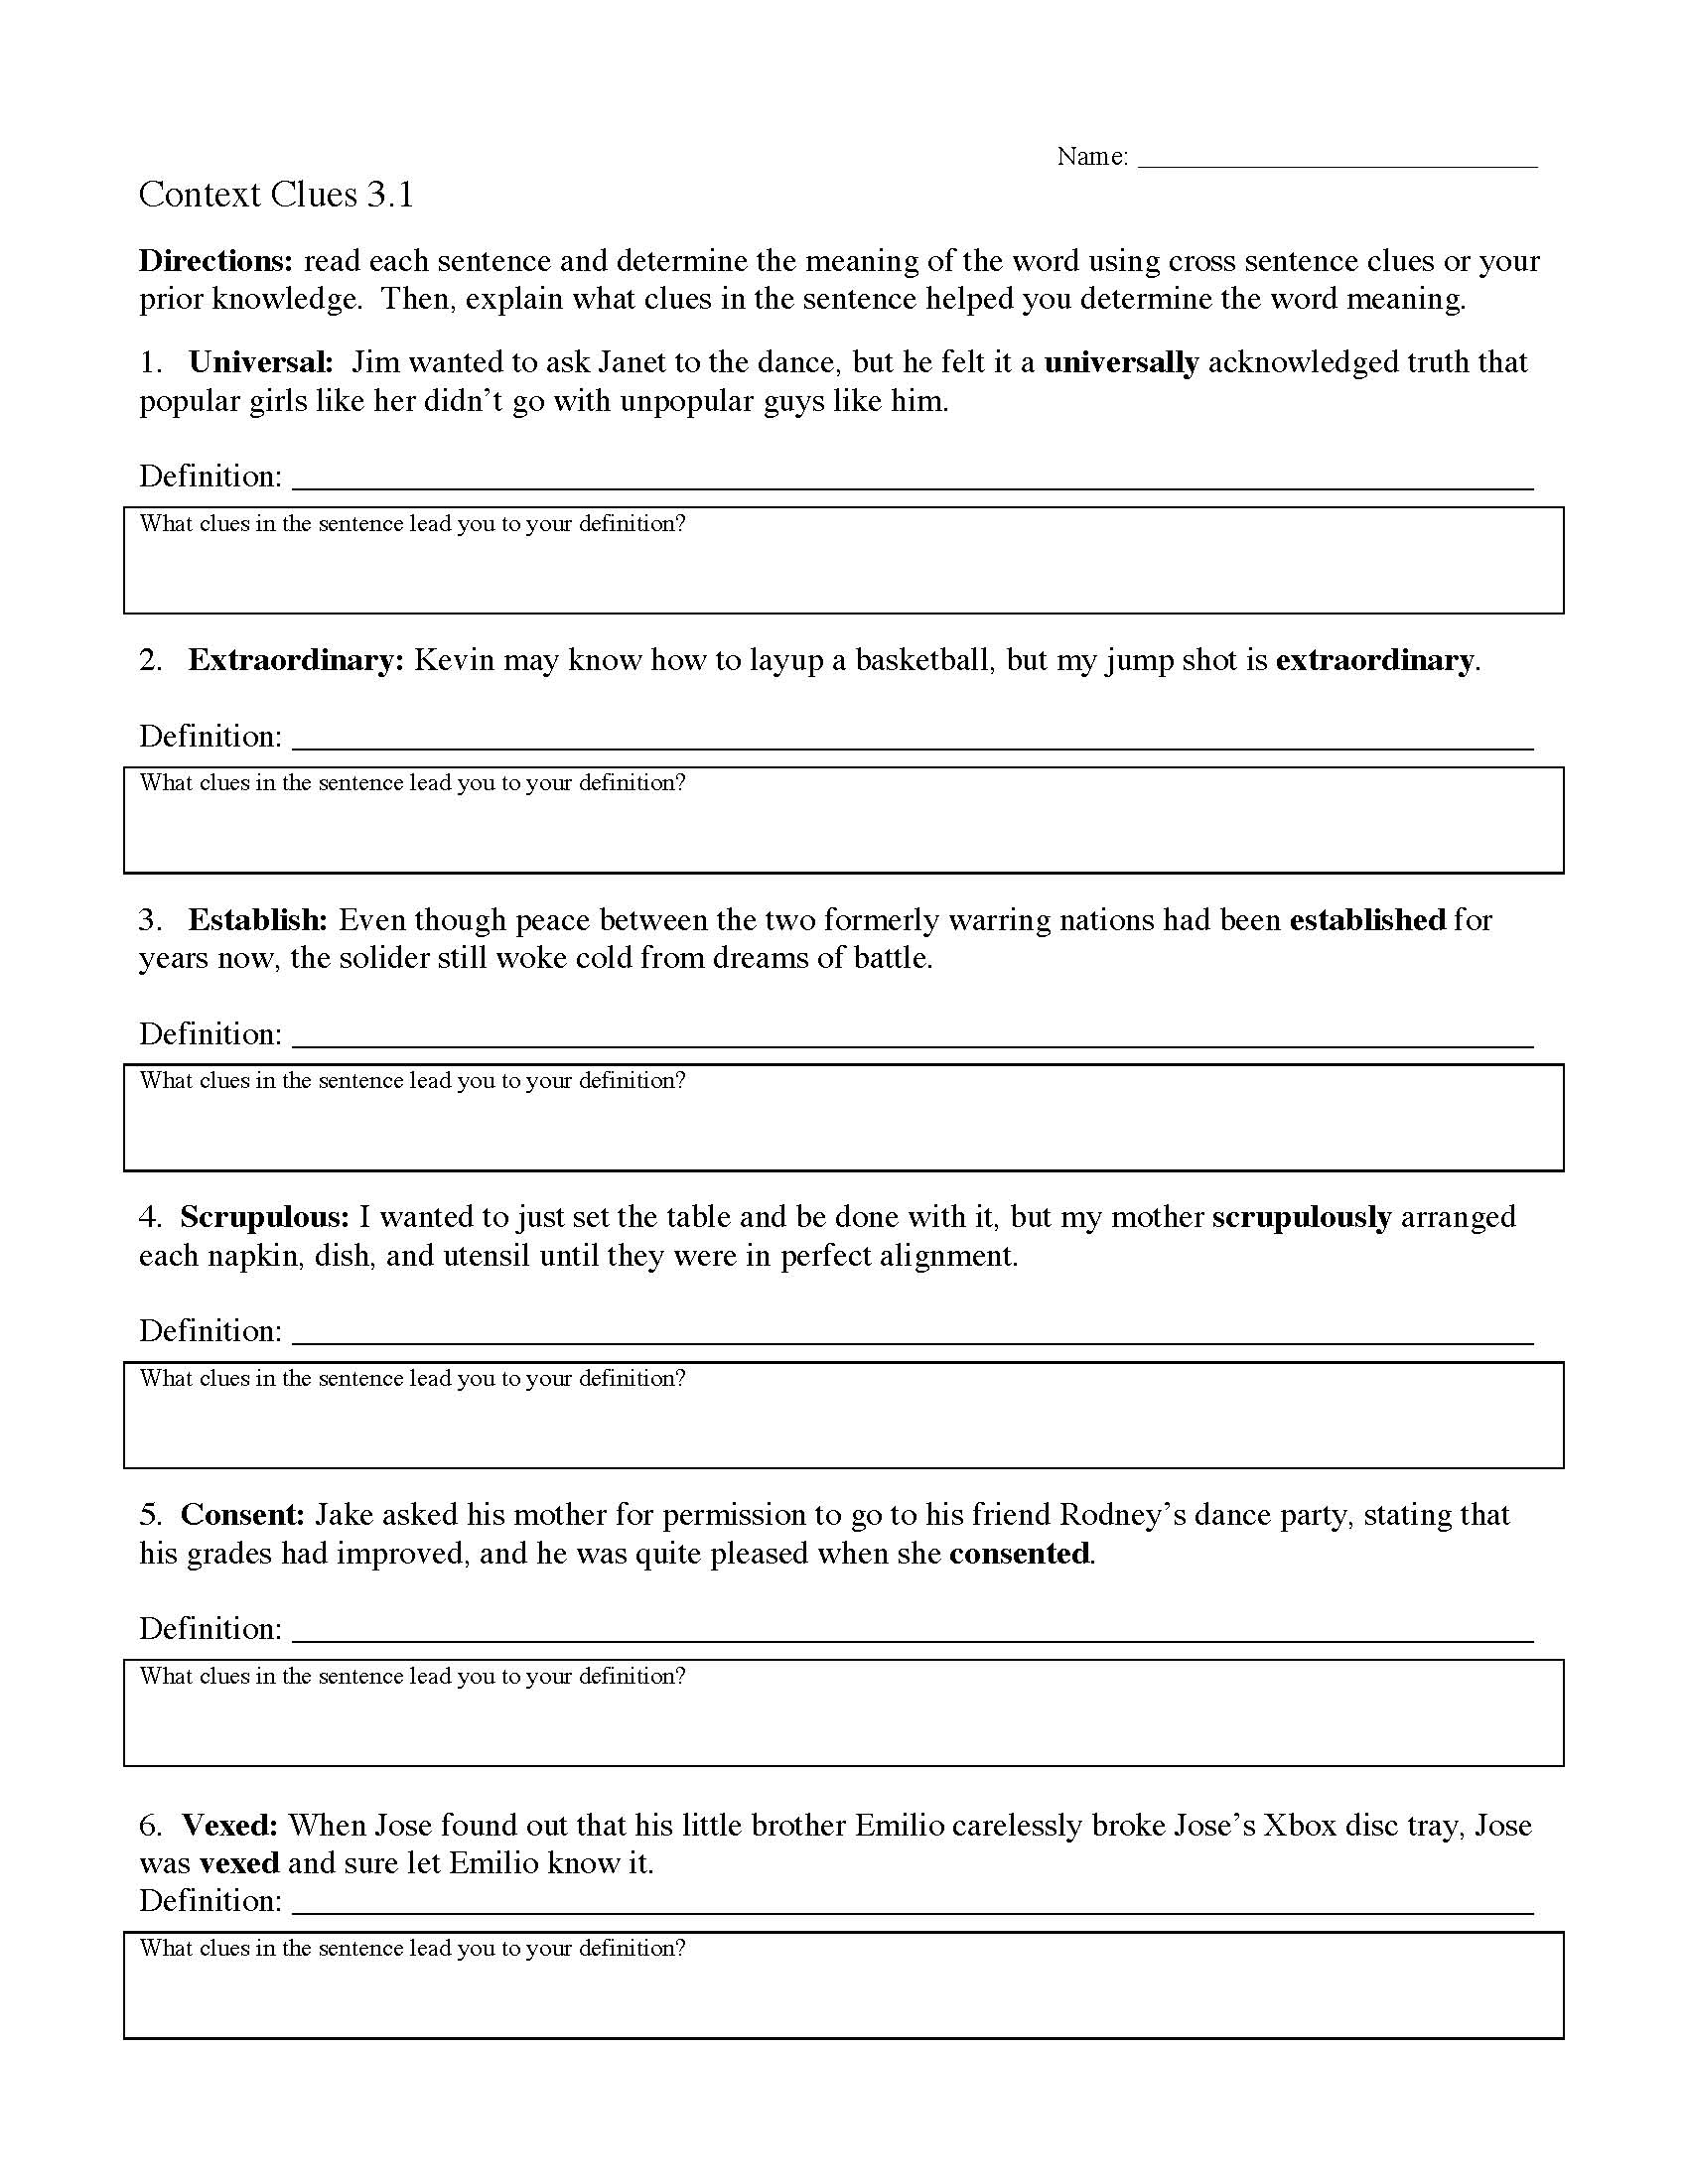 This is a preview image of Context Clues Worksheet 3.1. Click on it to enlarge it or view the source file.